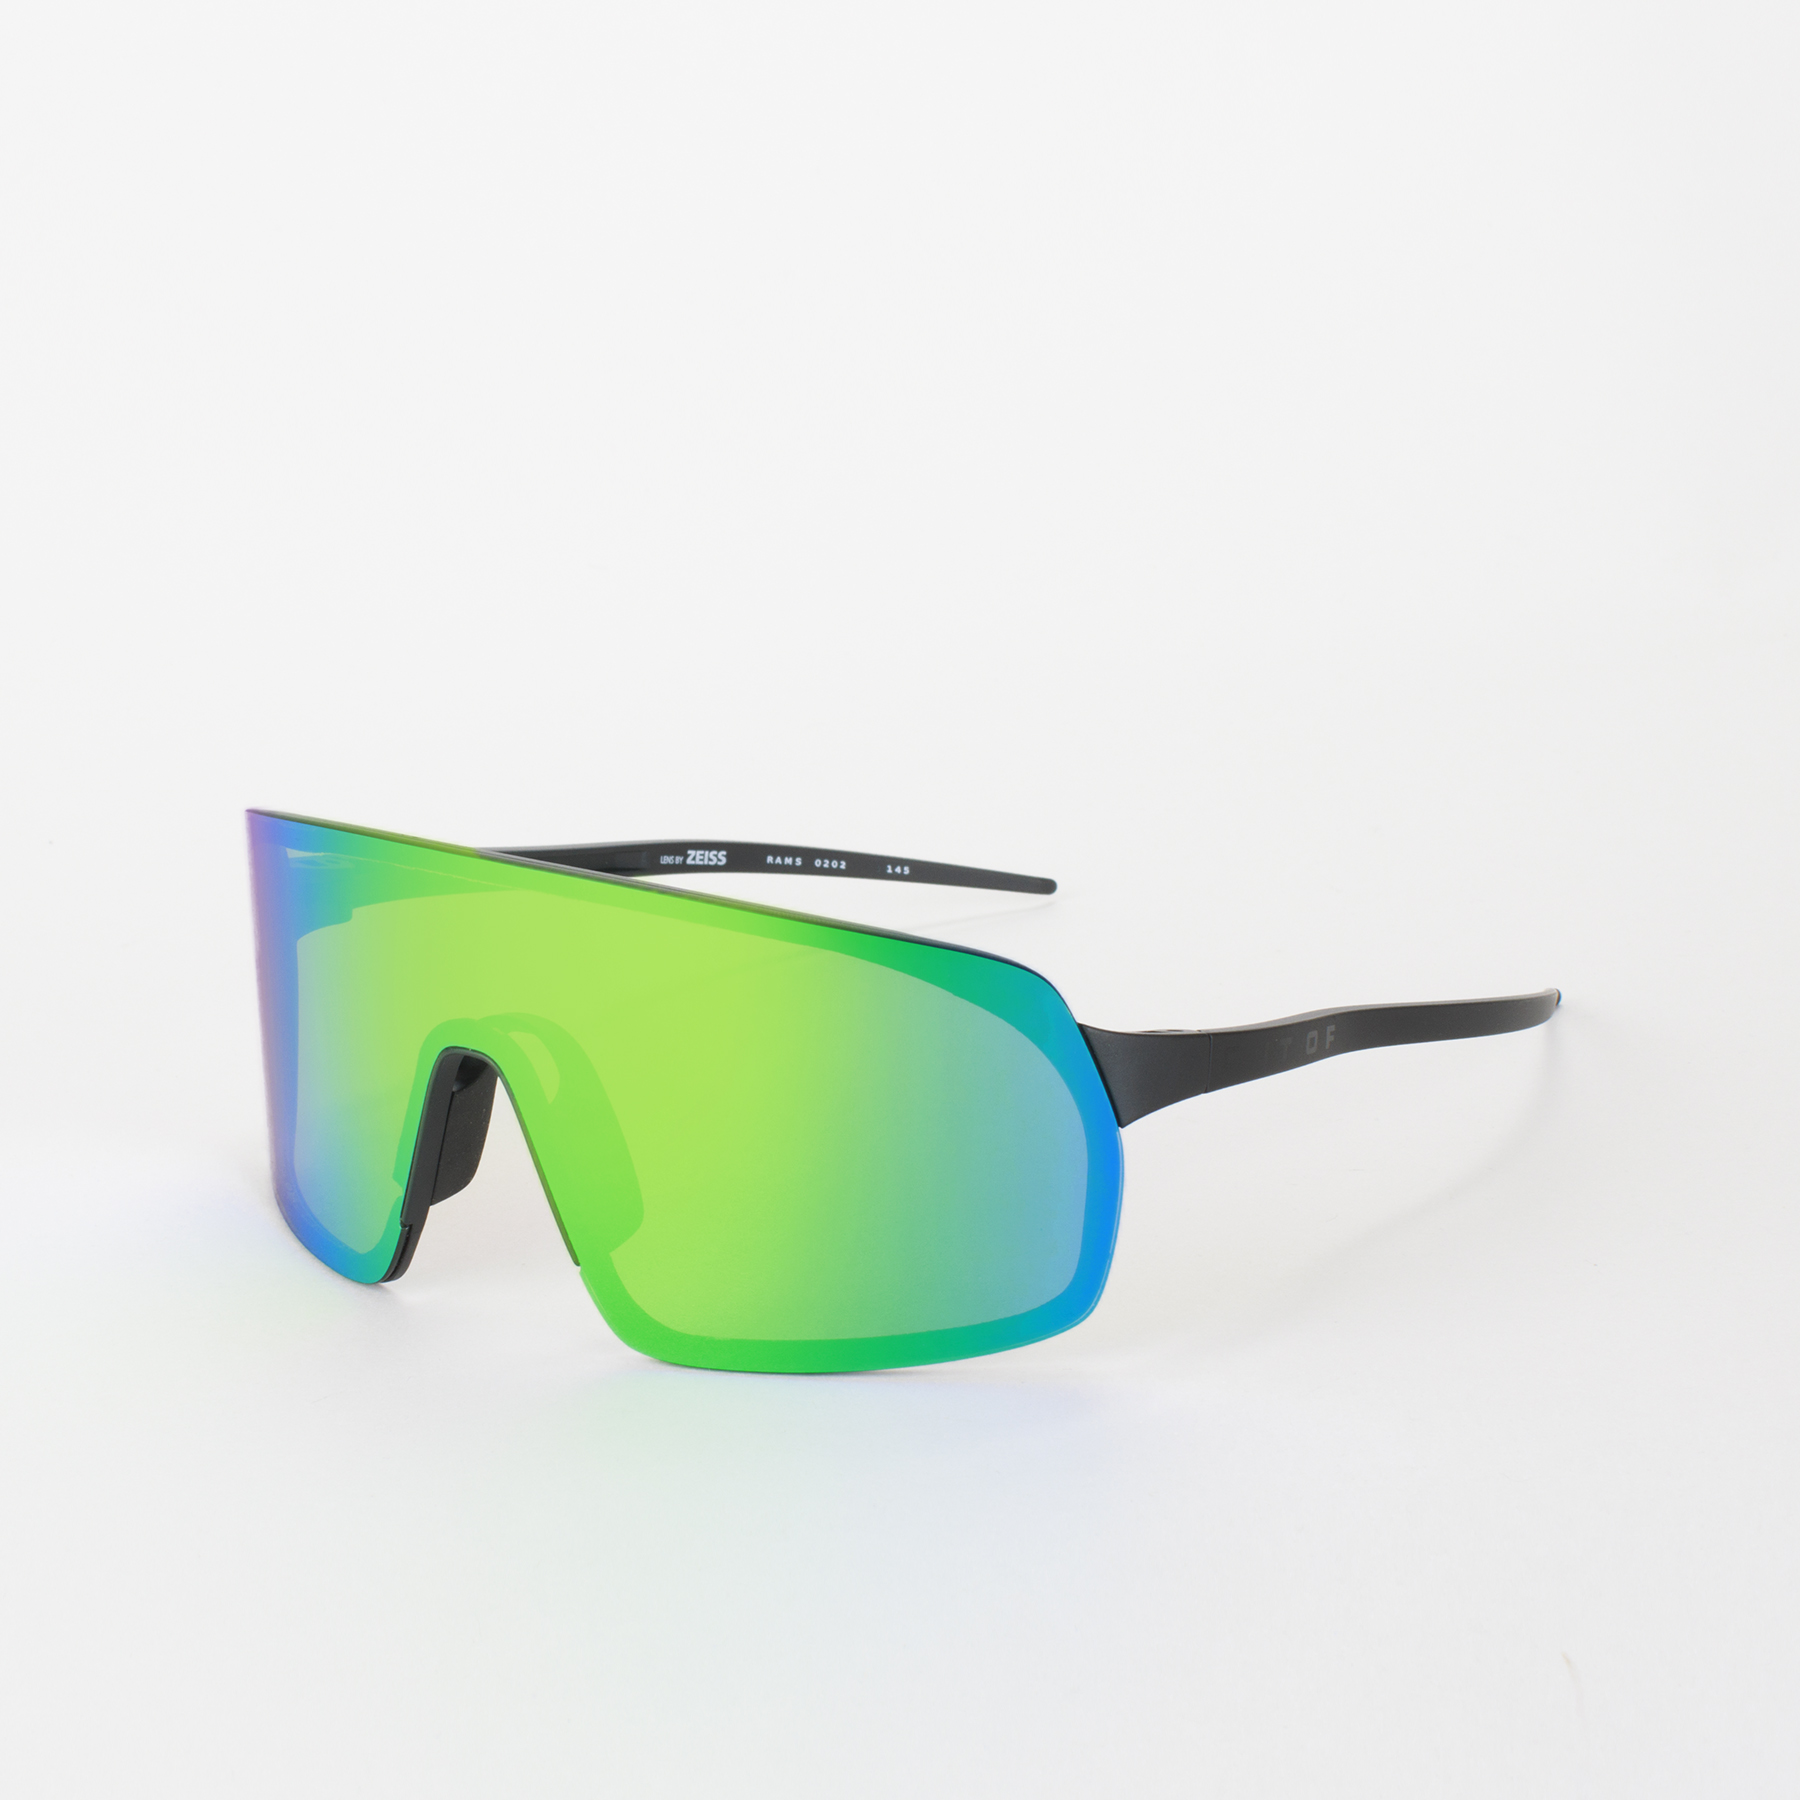 Rams performance sunglasses with Green MCI lens